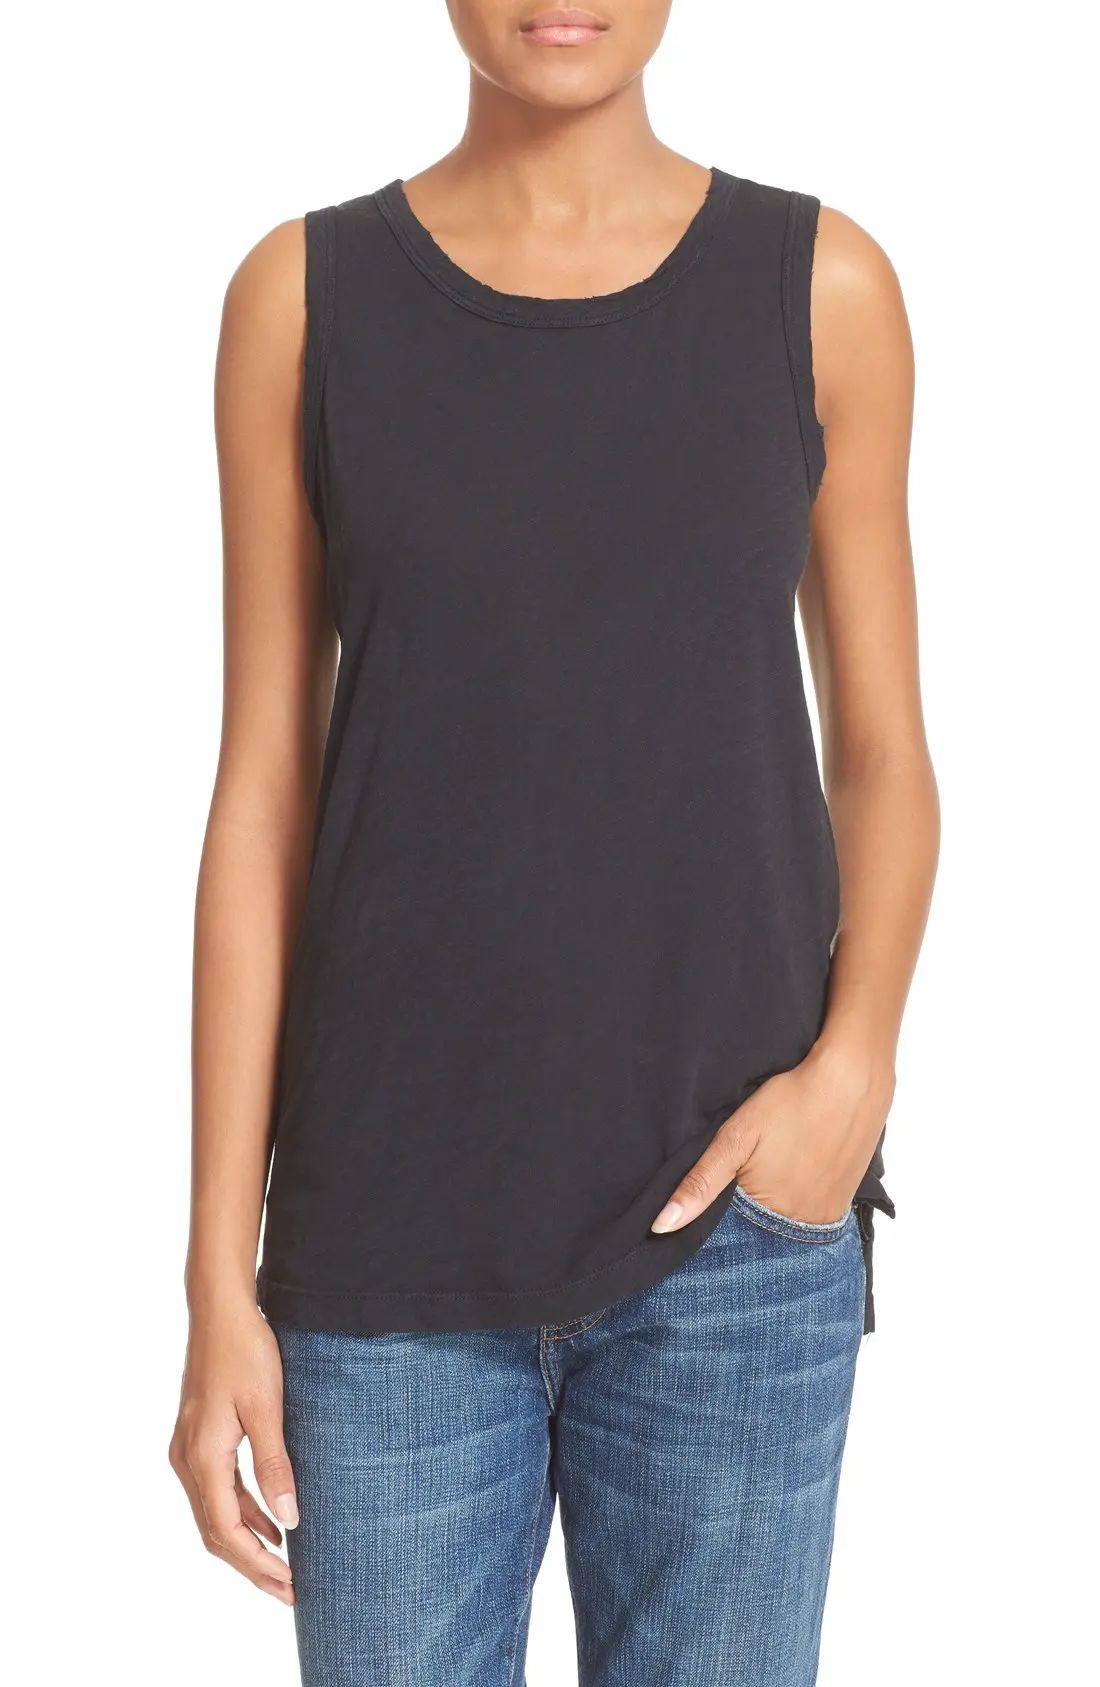 'The Muscle Tee' Cotton Tank | Nordstrom